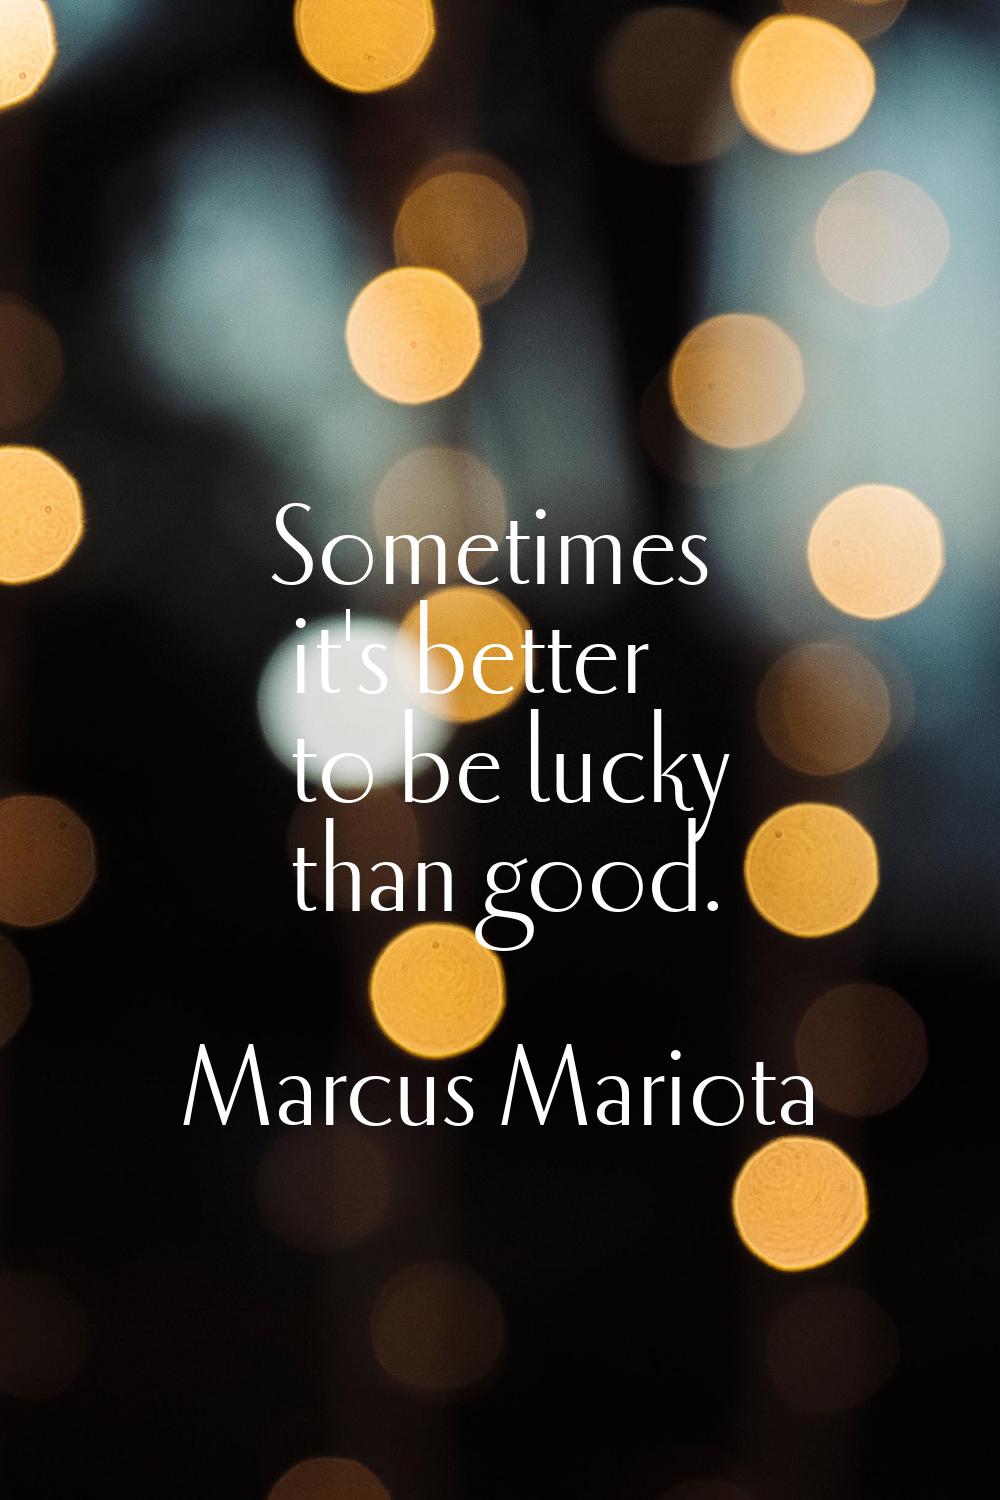 Sometimes it's better to be lucky than good.